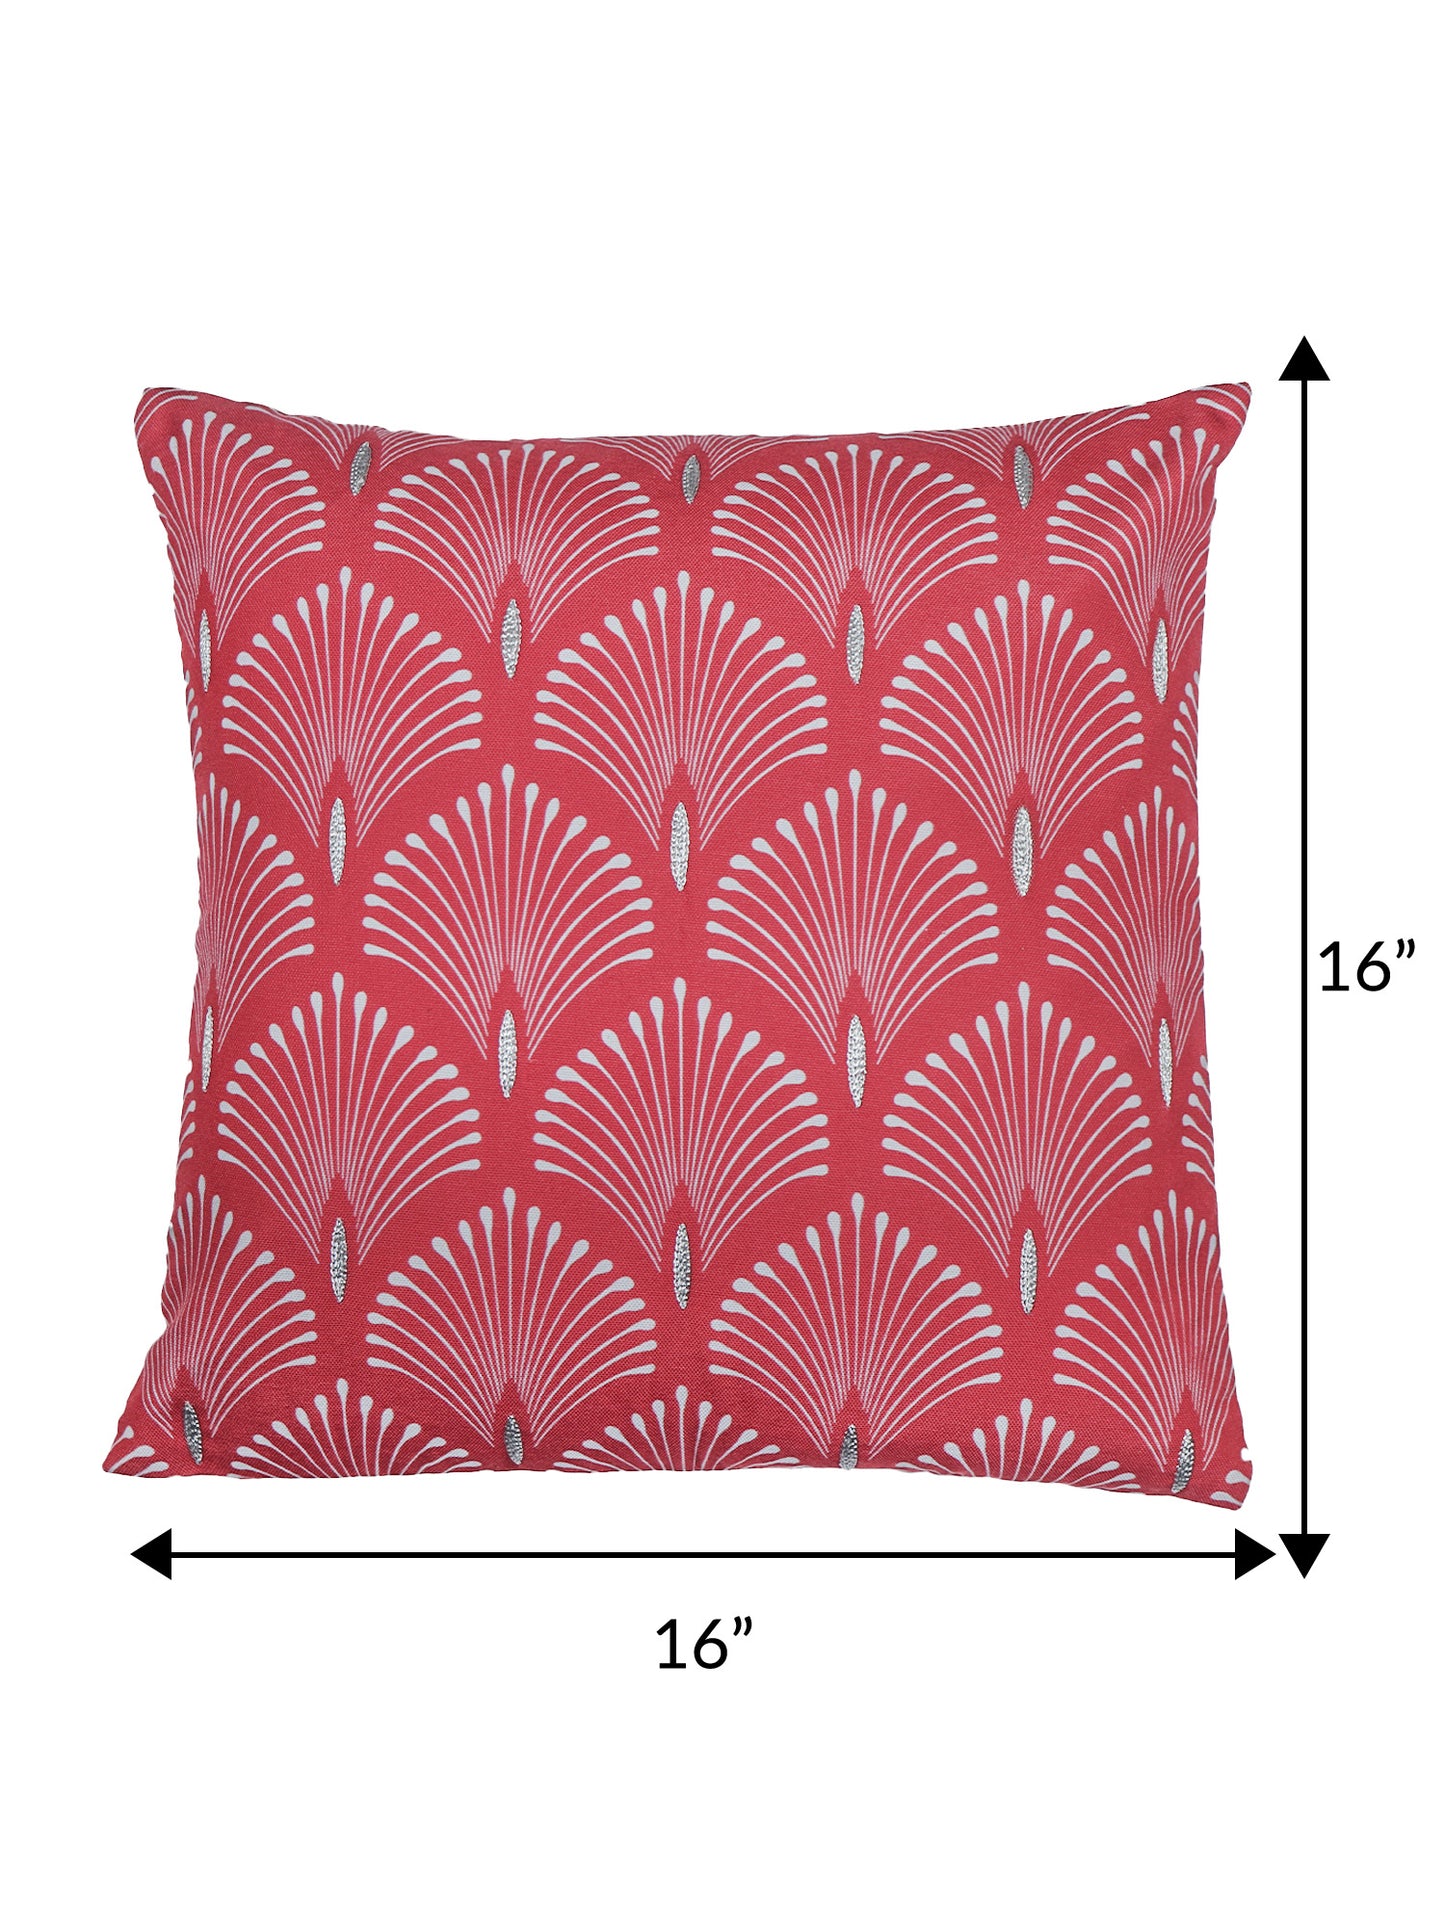 ZEBA World Square Cushion Cover for Sofa, Bed | Mughal and Art Deco Print with Hand Embroidery with Cord Piping - Cotton Blend | Red/White - 16x16in(40x40cm) (Pack of 2)